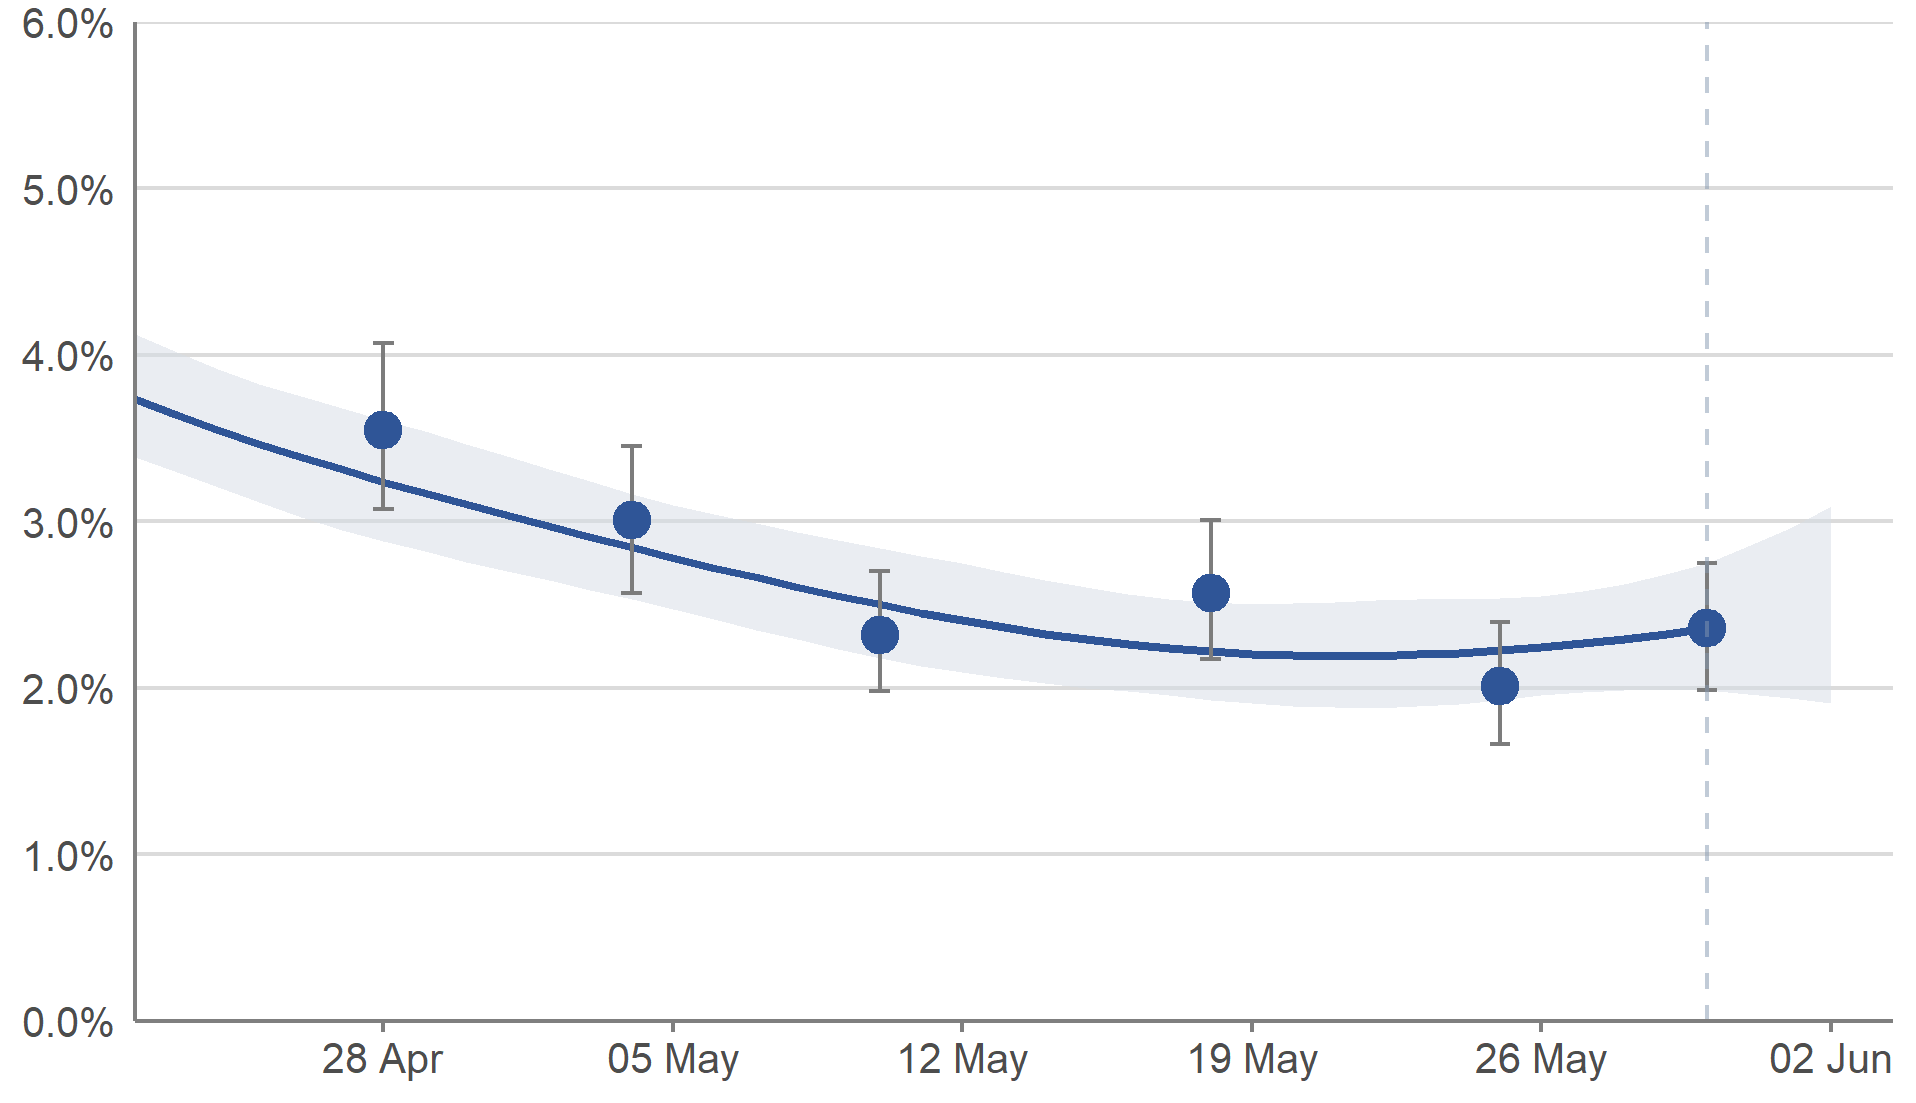 A chart showing estimates of the percentage of the population in Scotland testing positive for COVID-19 between 22 April 2022 and 2 June 2022. Modelled daily estimates are represented by a blue line with 95% credible intervals in pale blue shading, and official reported weekly estimates are represented by blue circles with whiskers showing the 95% credible intervals. The trend in the estimated percentage of people testing positive for COVID-19 is uncertain in the most recent week.